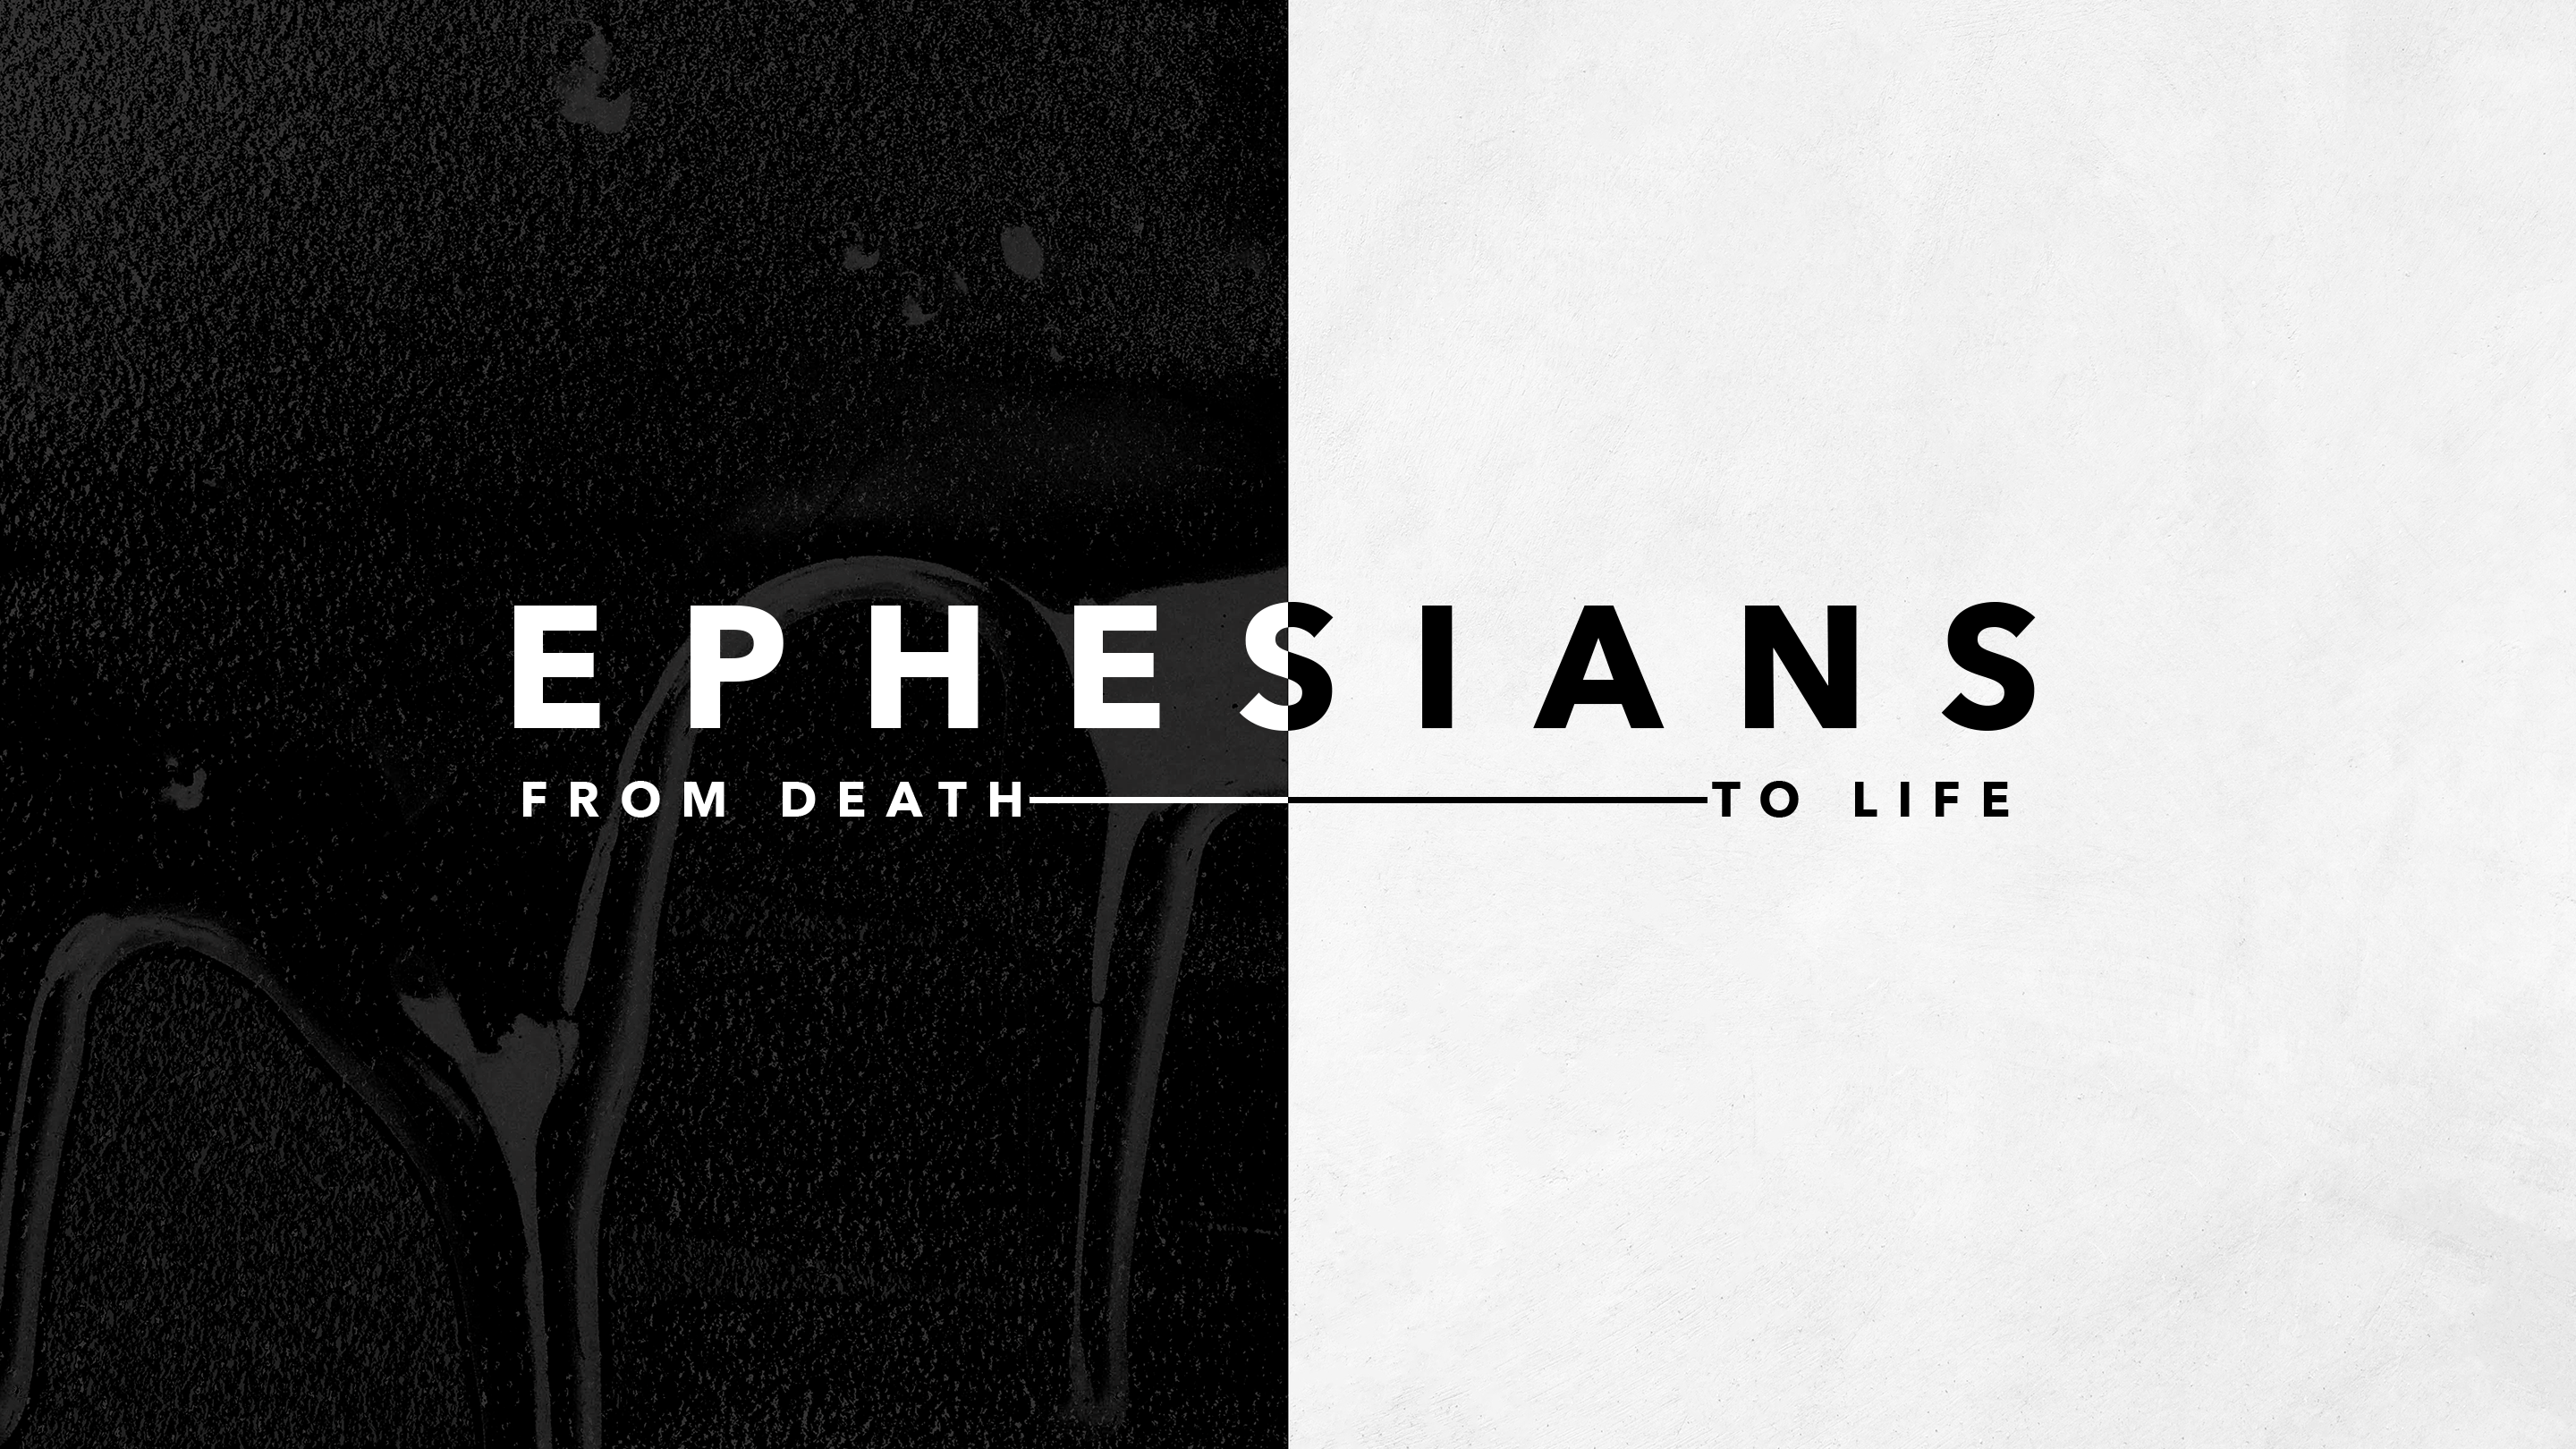 From Death to Life: It’s All About Christ (Ephesians 1:1-6)